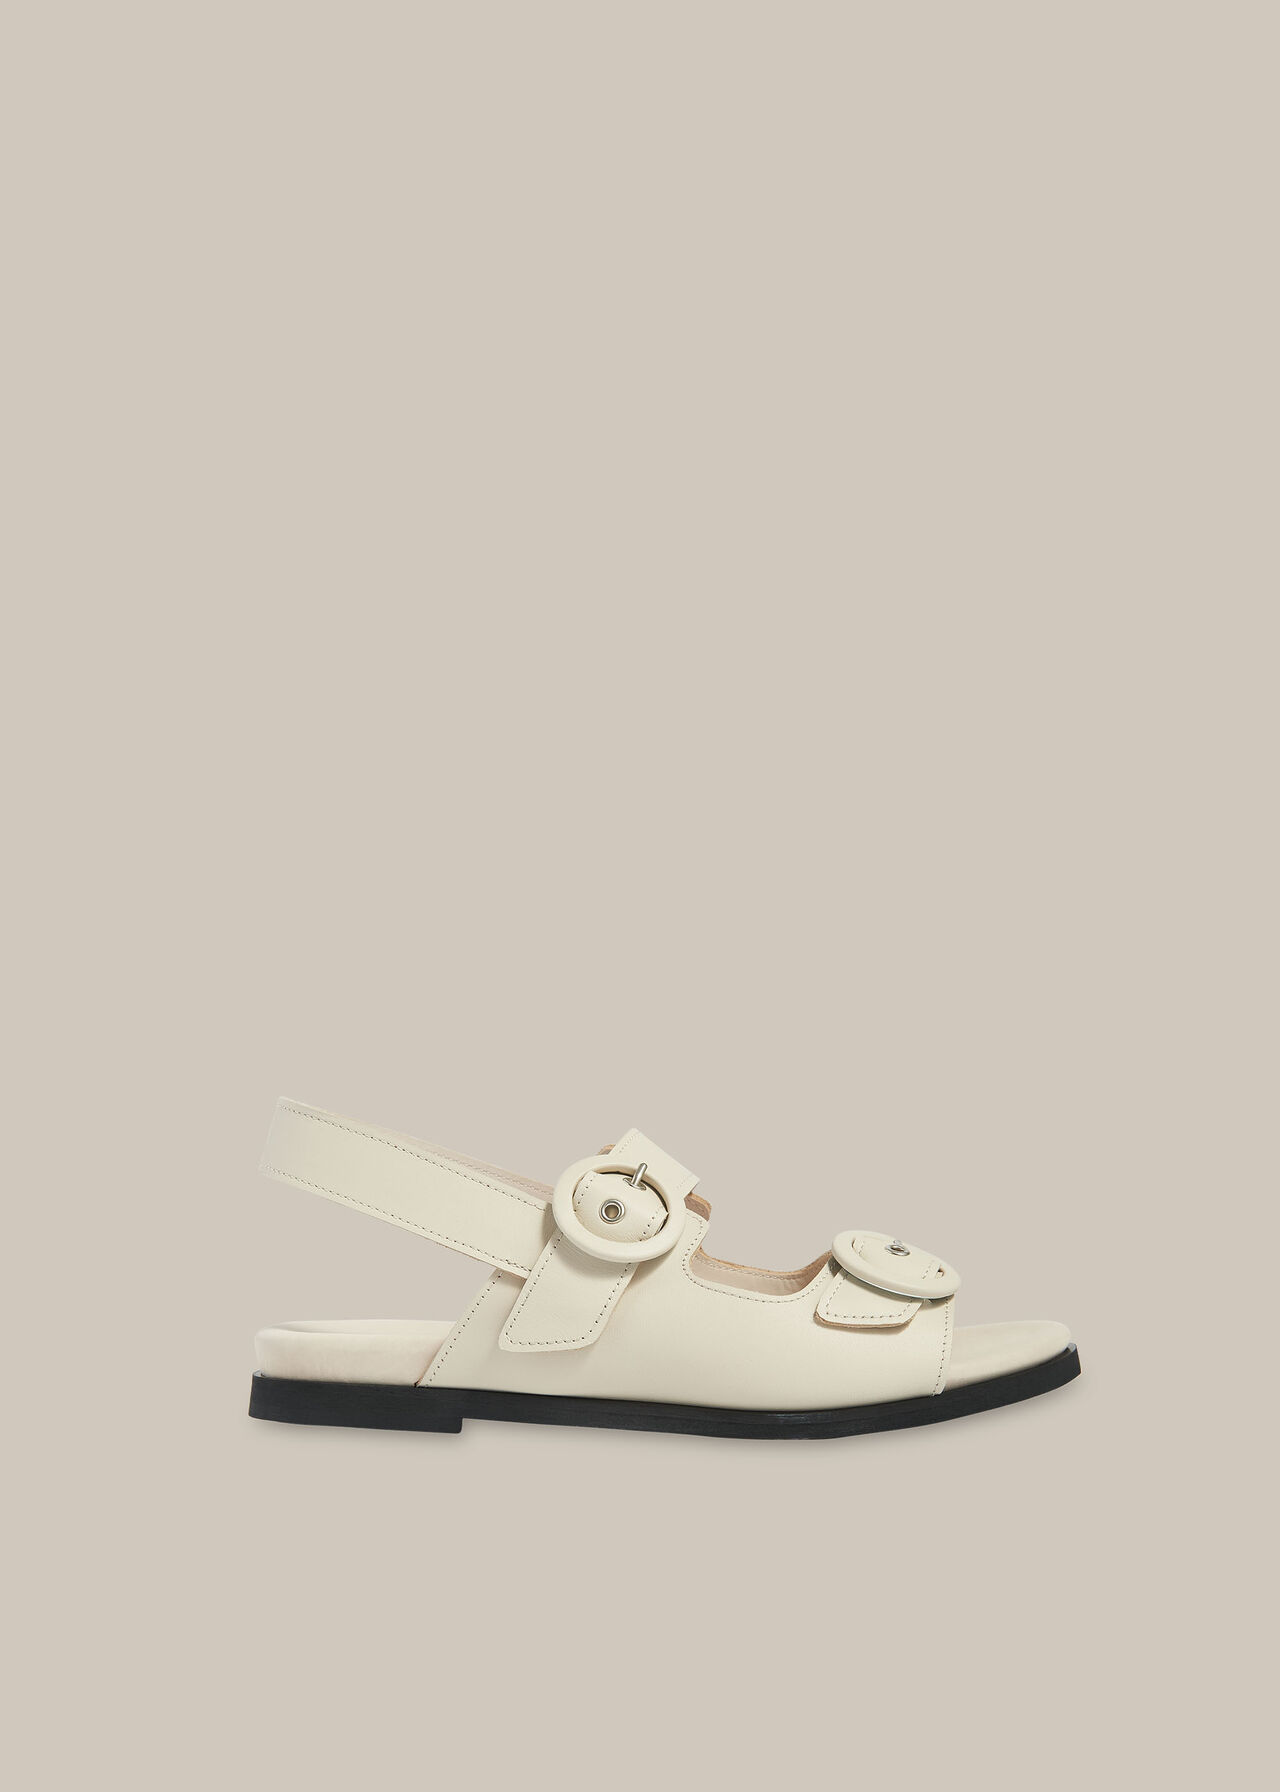 Stone Marcie Double Buckle Sandal | WHISTLES